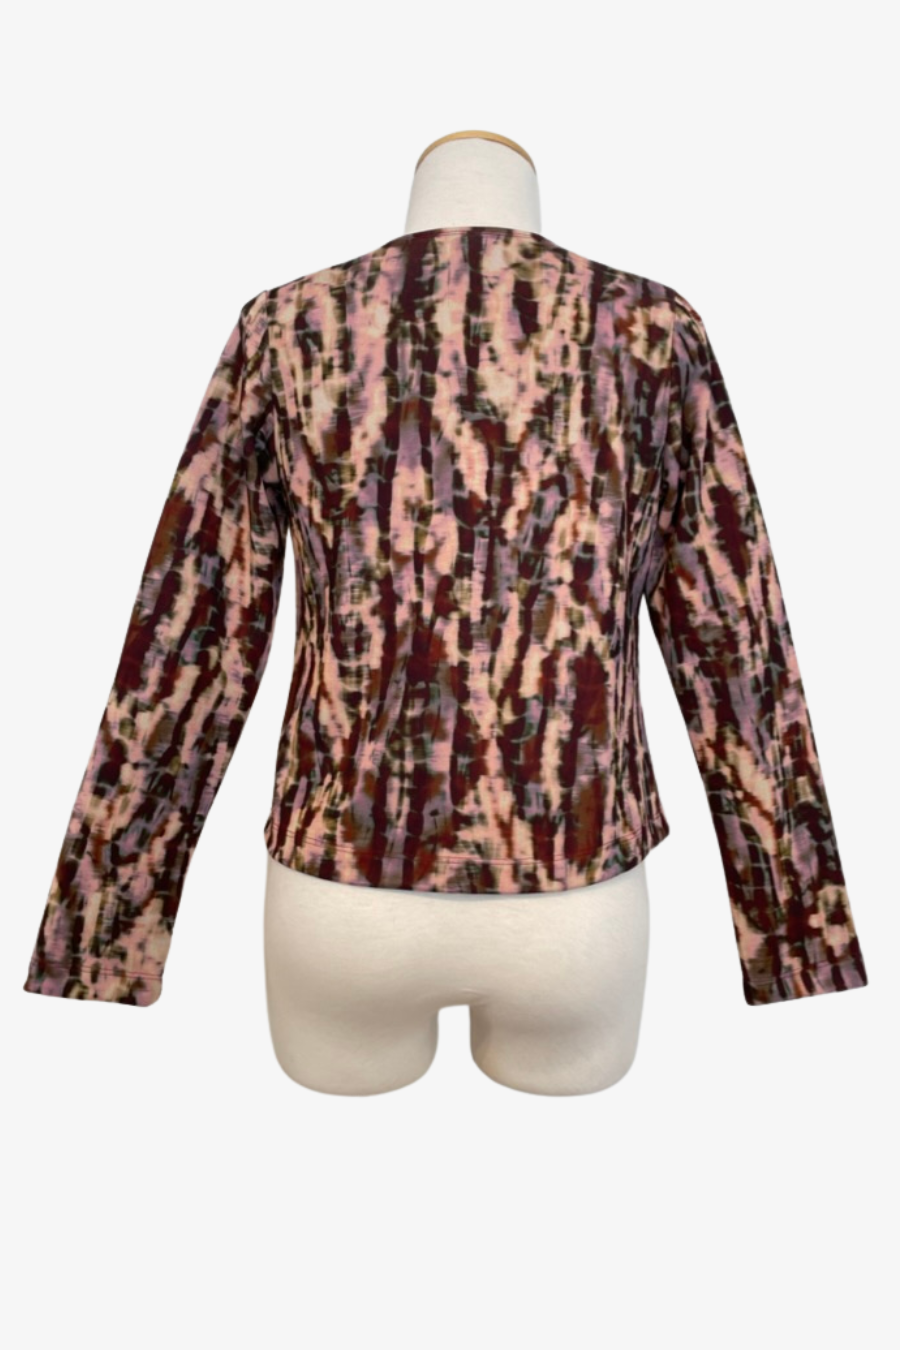 Betz Jacket in Corteccia Print Fabric ONLINE ONLY